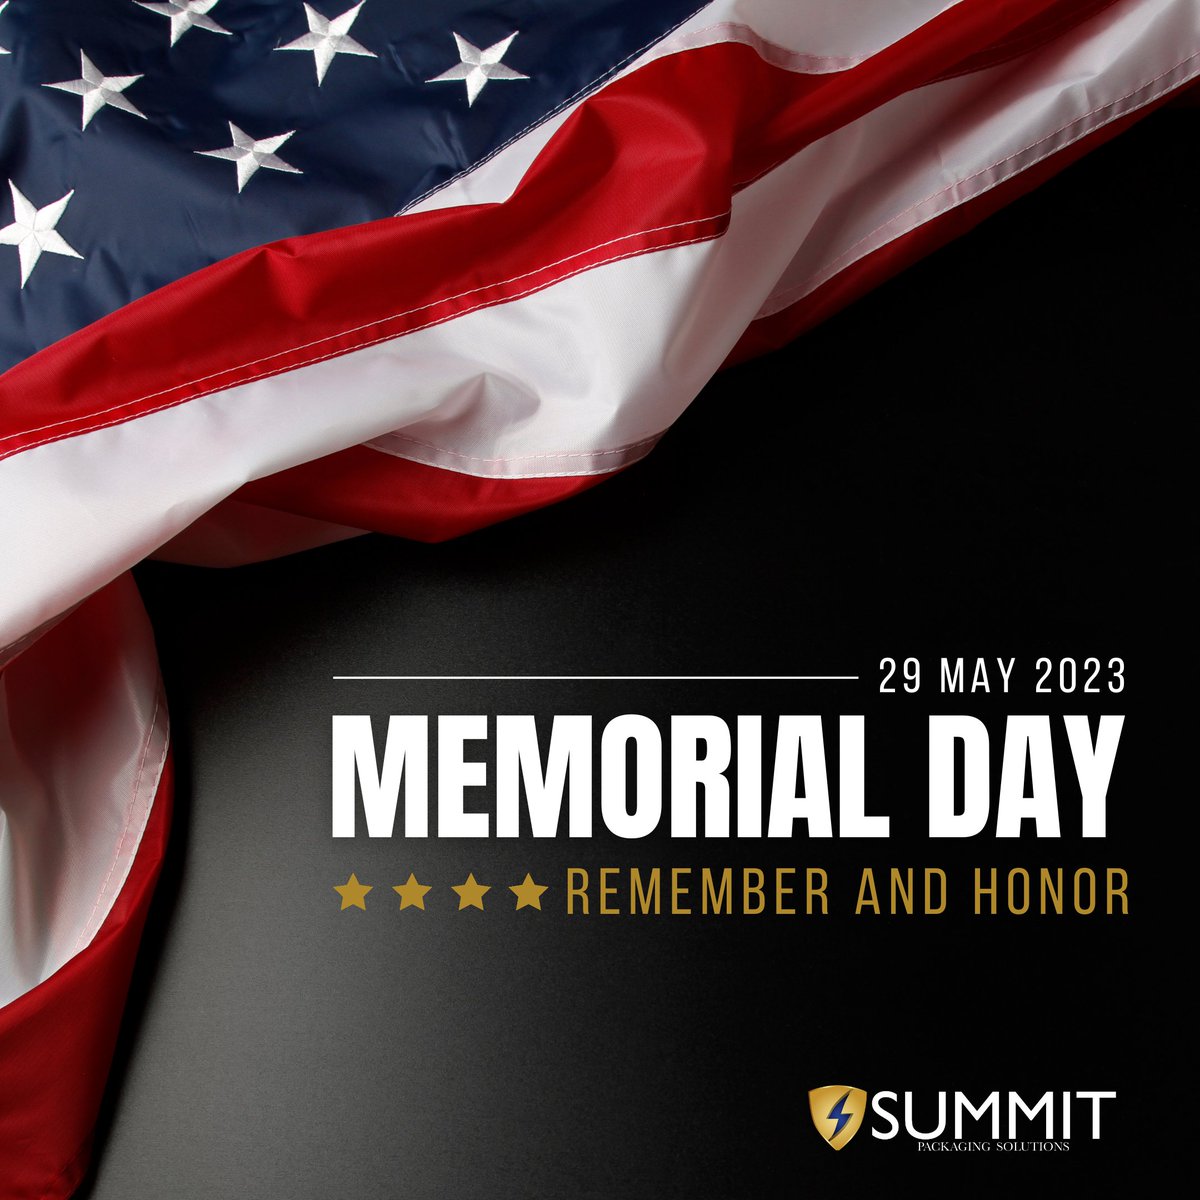 On this Memorial Day, we take a moment to pay tribute and give thanks to the brave souls who gave their lives in service to our nation. We honor their memory by reflecting on their sacrifice and keeping their legacy alive.